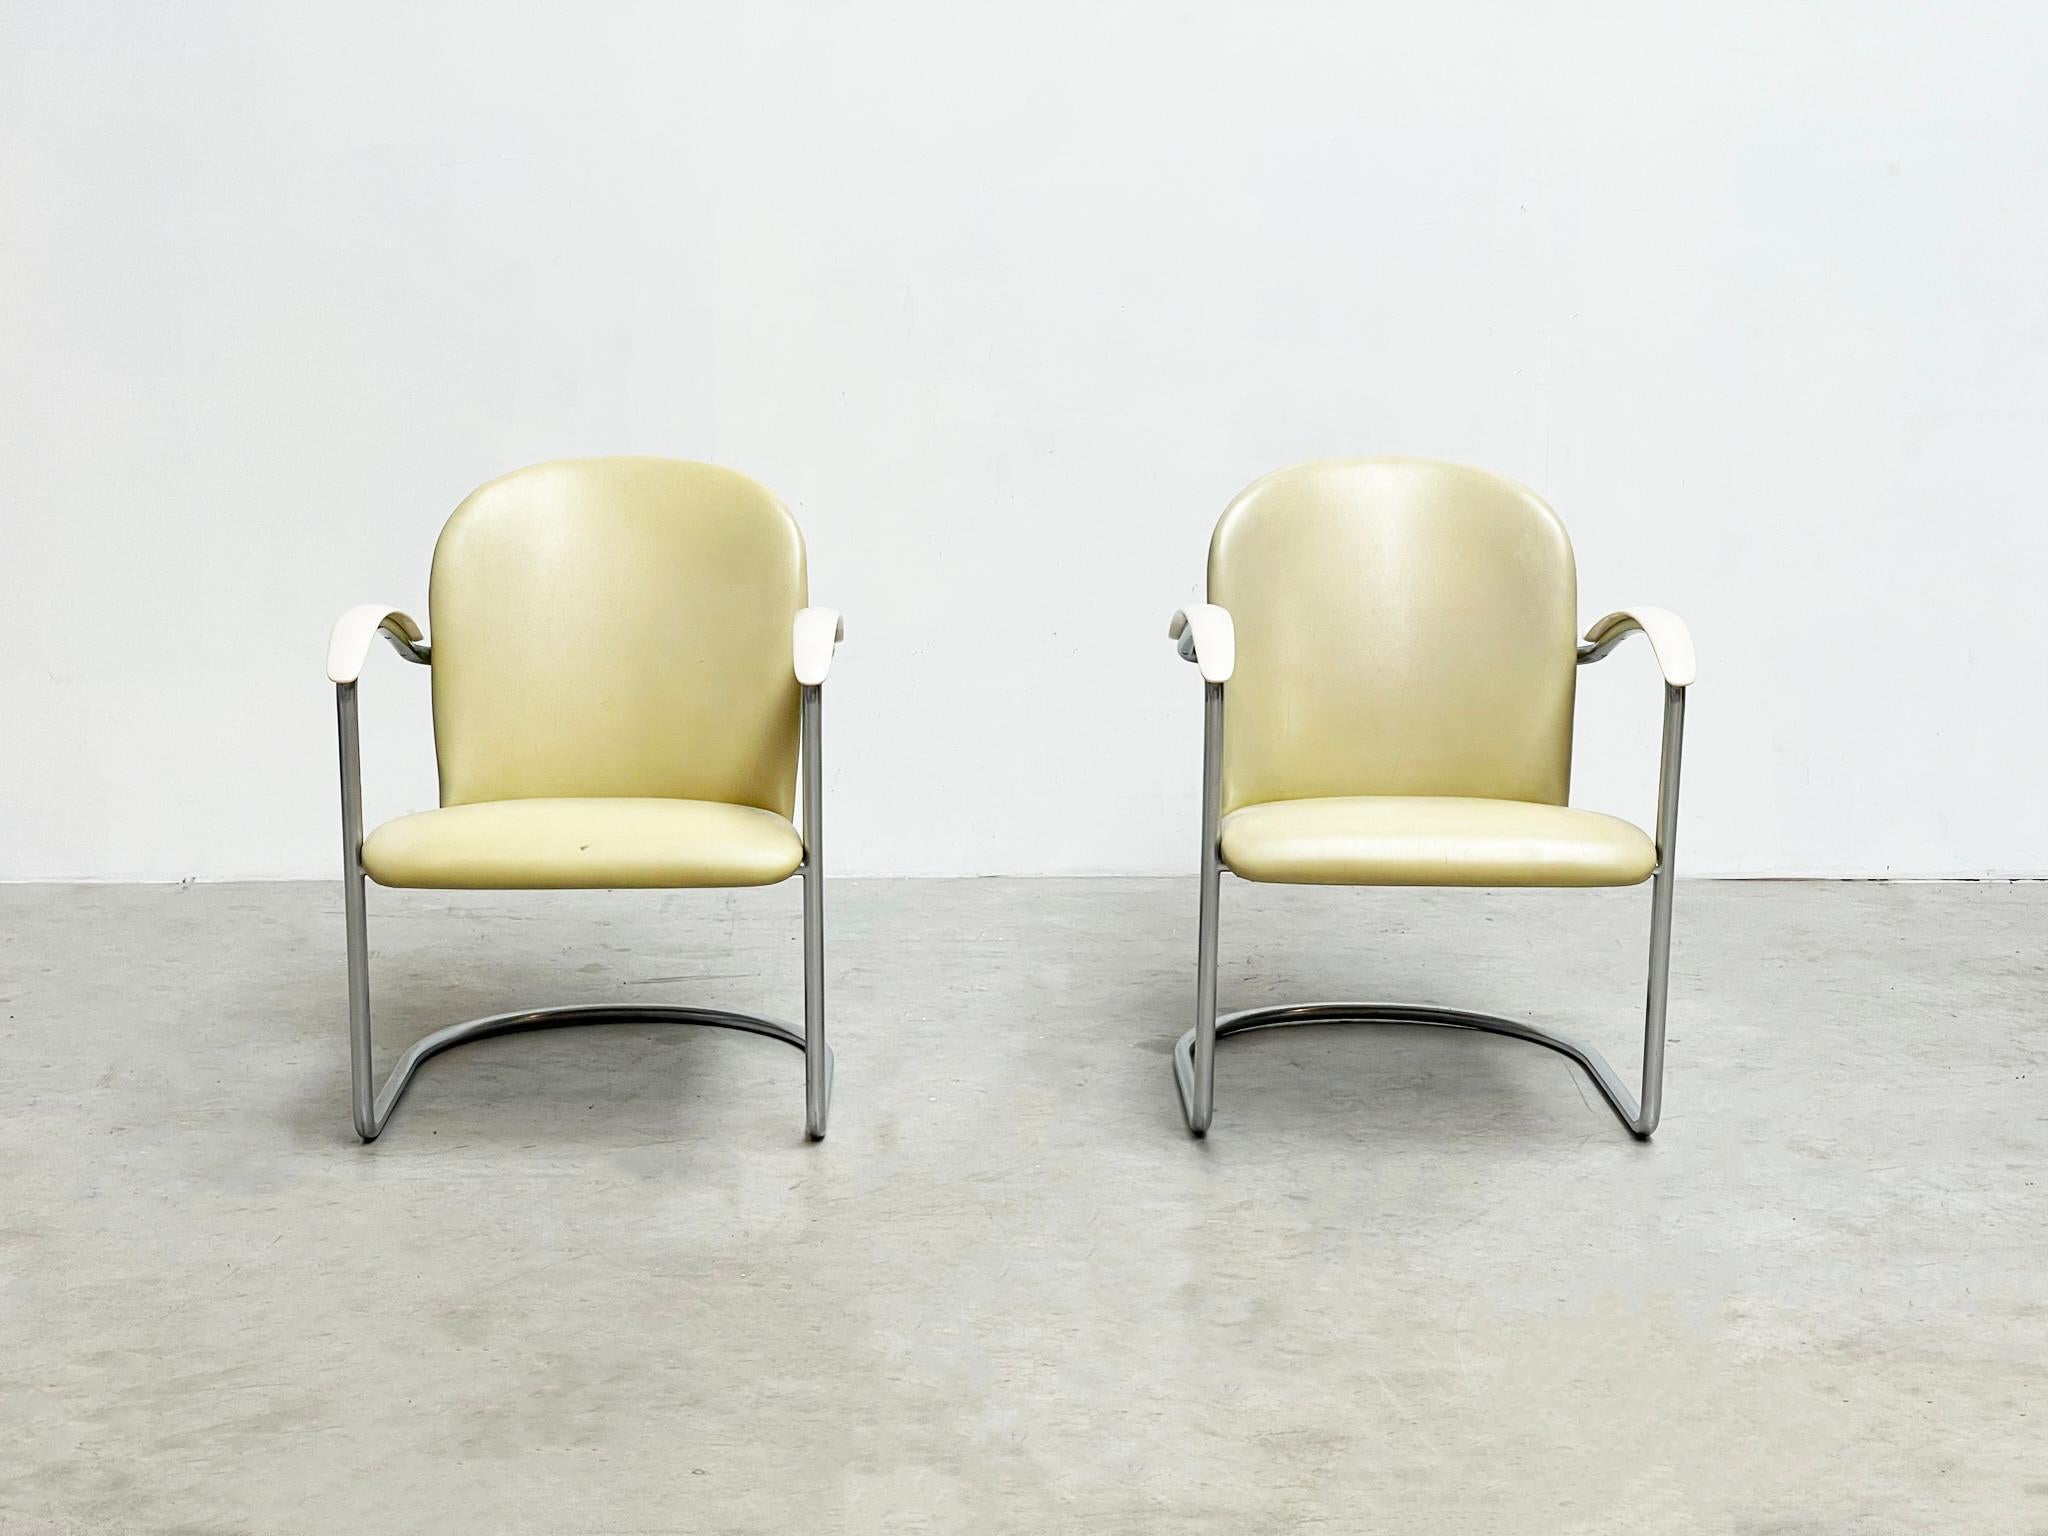  

Unique lounge chairs designed by famous designer WH Gispen for Gispen, Holland in 1937. These perticular chairs were custom-made for T.H. Delft in 1961, featuring rare white bakelite armrests and pastel yellow leatherette upholstery. Exceptional